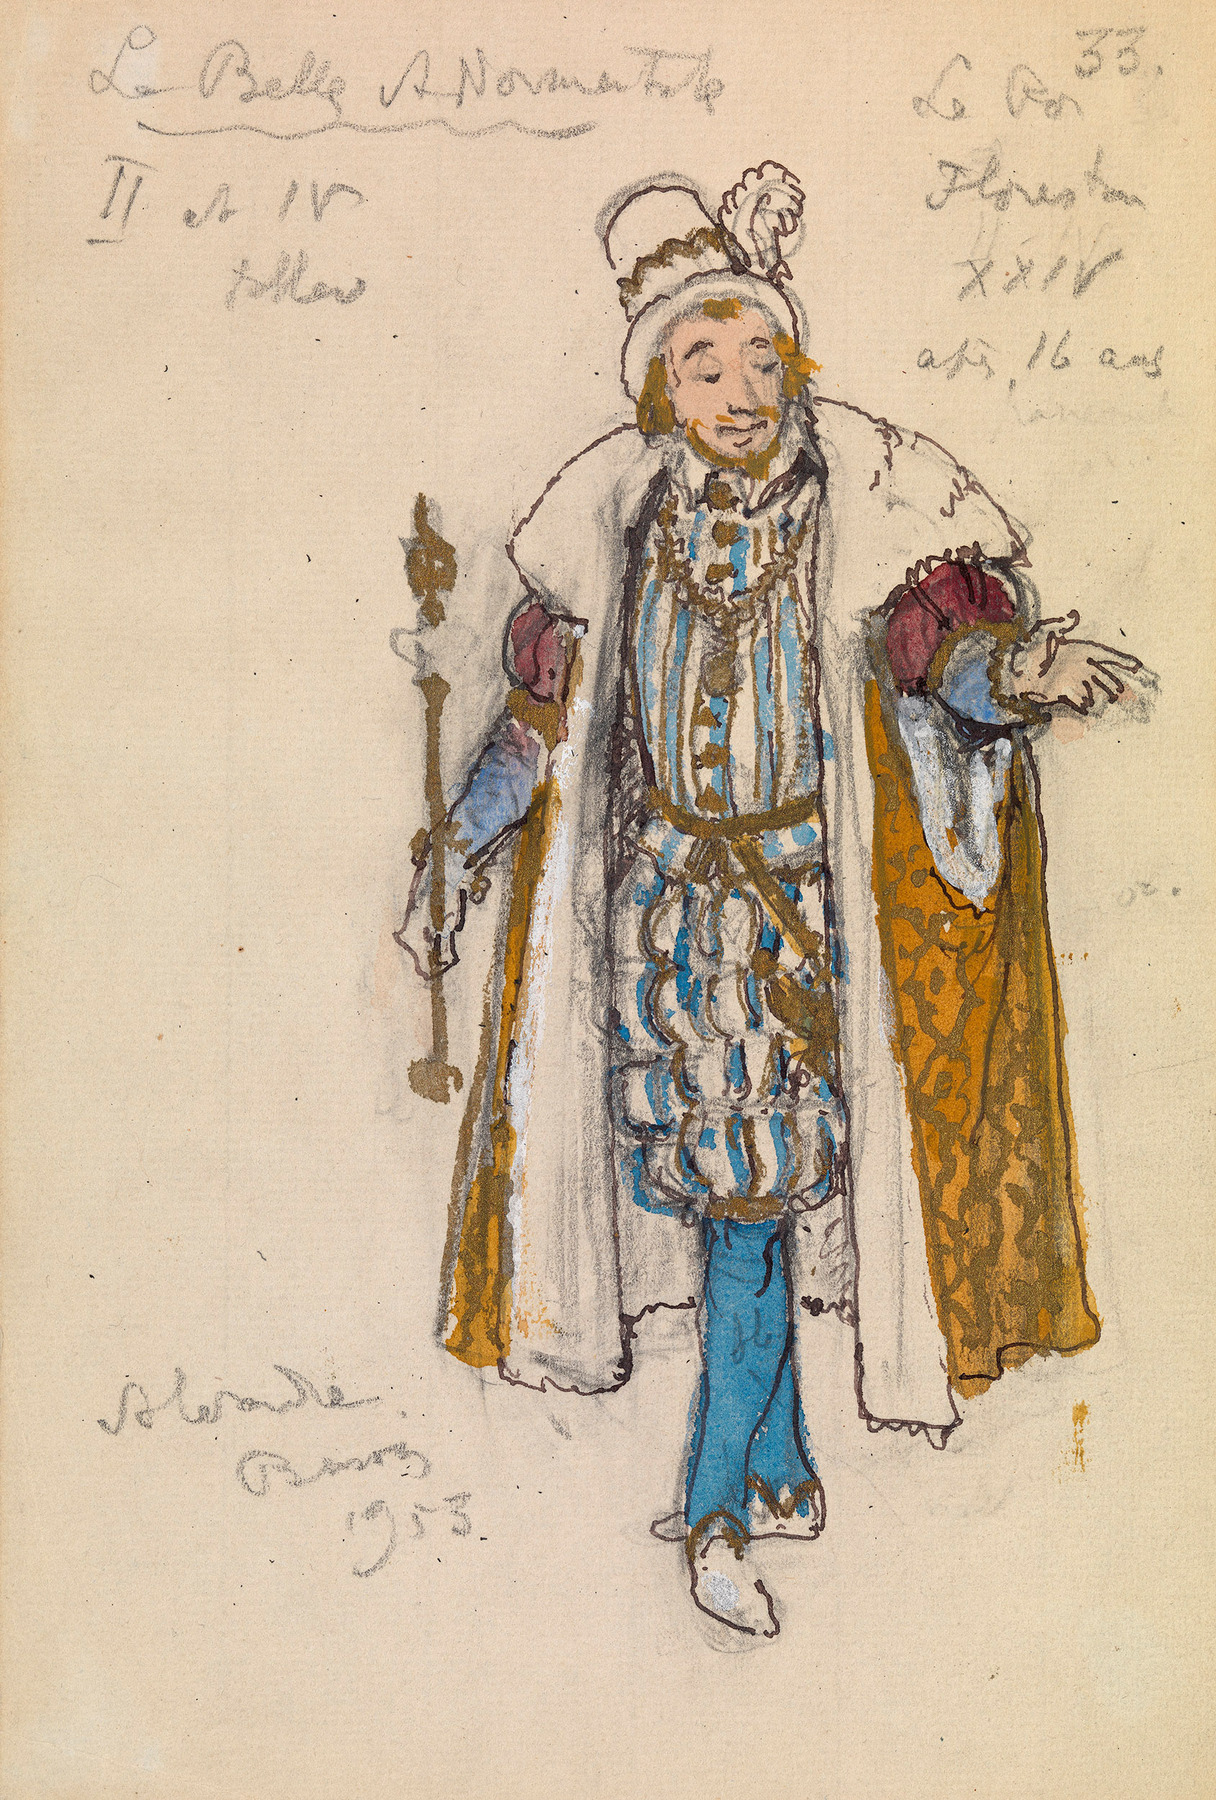 Costume Designs for Tchaikovsky's Ballet "The Sleeping Beauty"